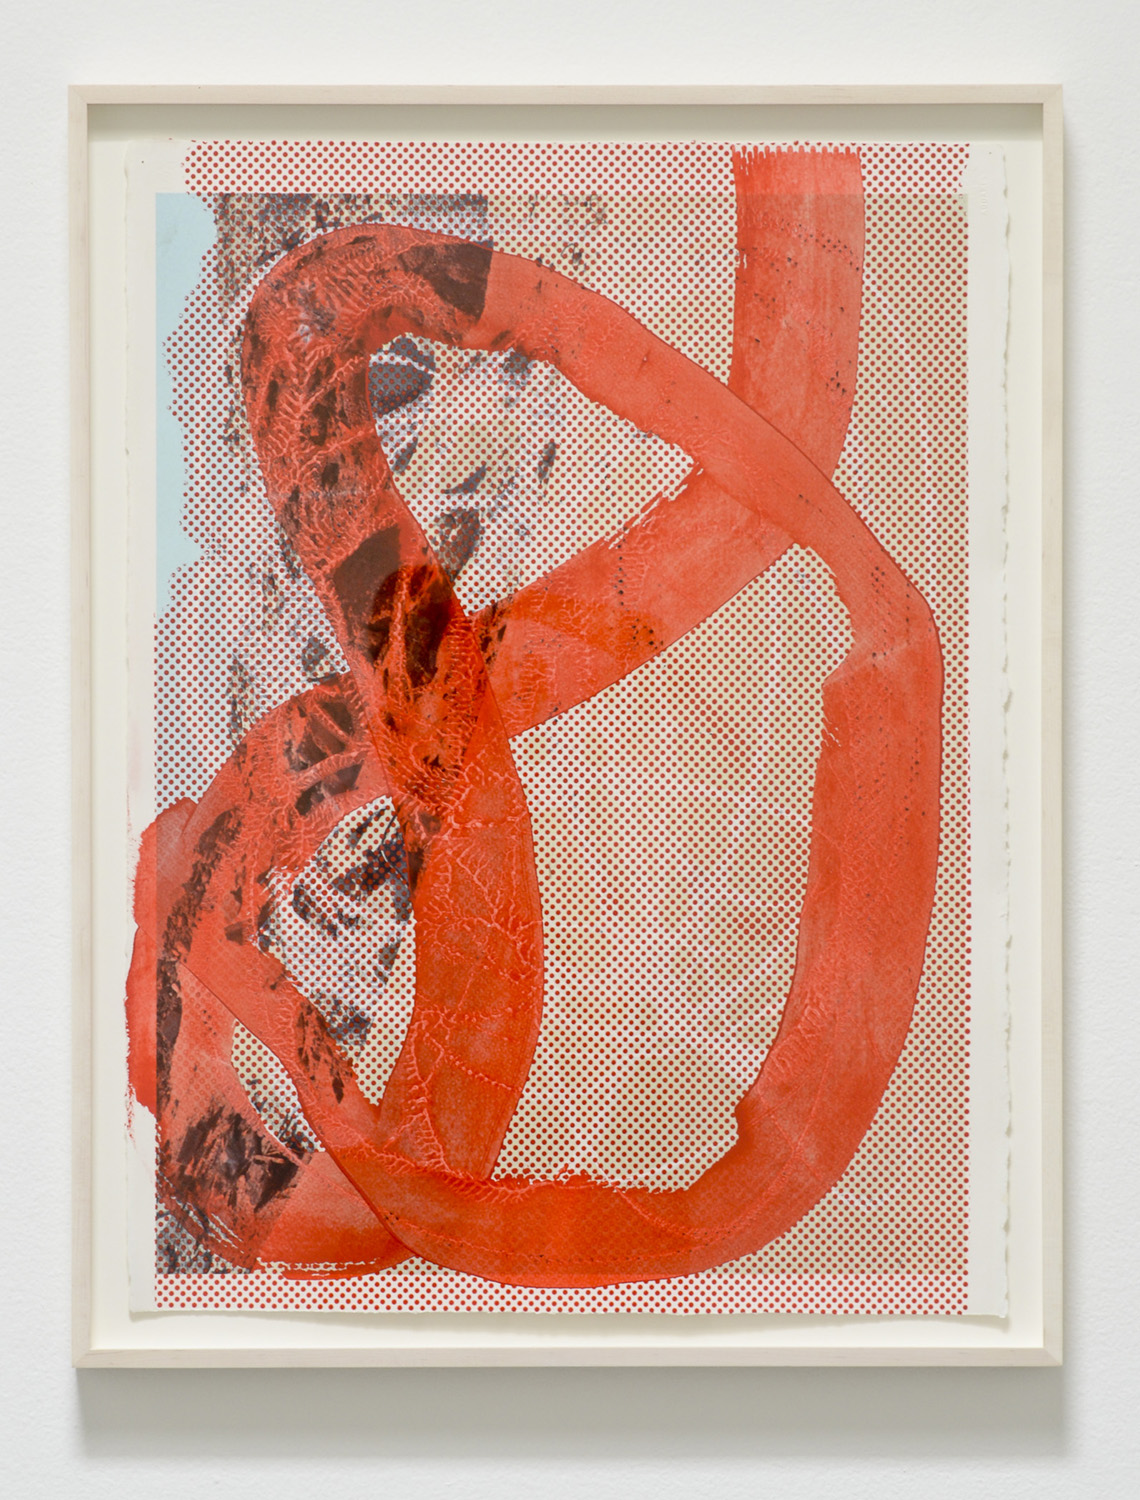  Untitled, 2013  Acrylic and UV cured ink on paper  33 x 25-1/2 inches  83.82 x 64.77 cm       